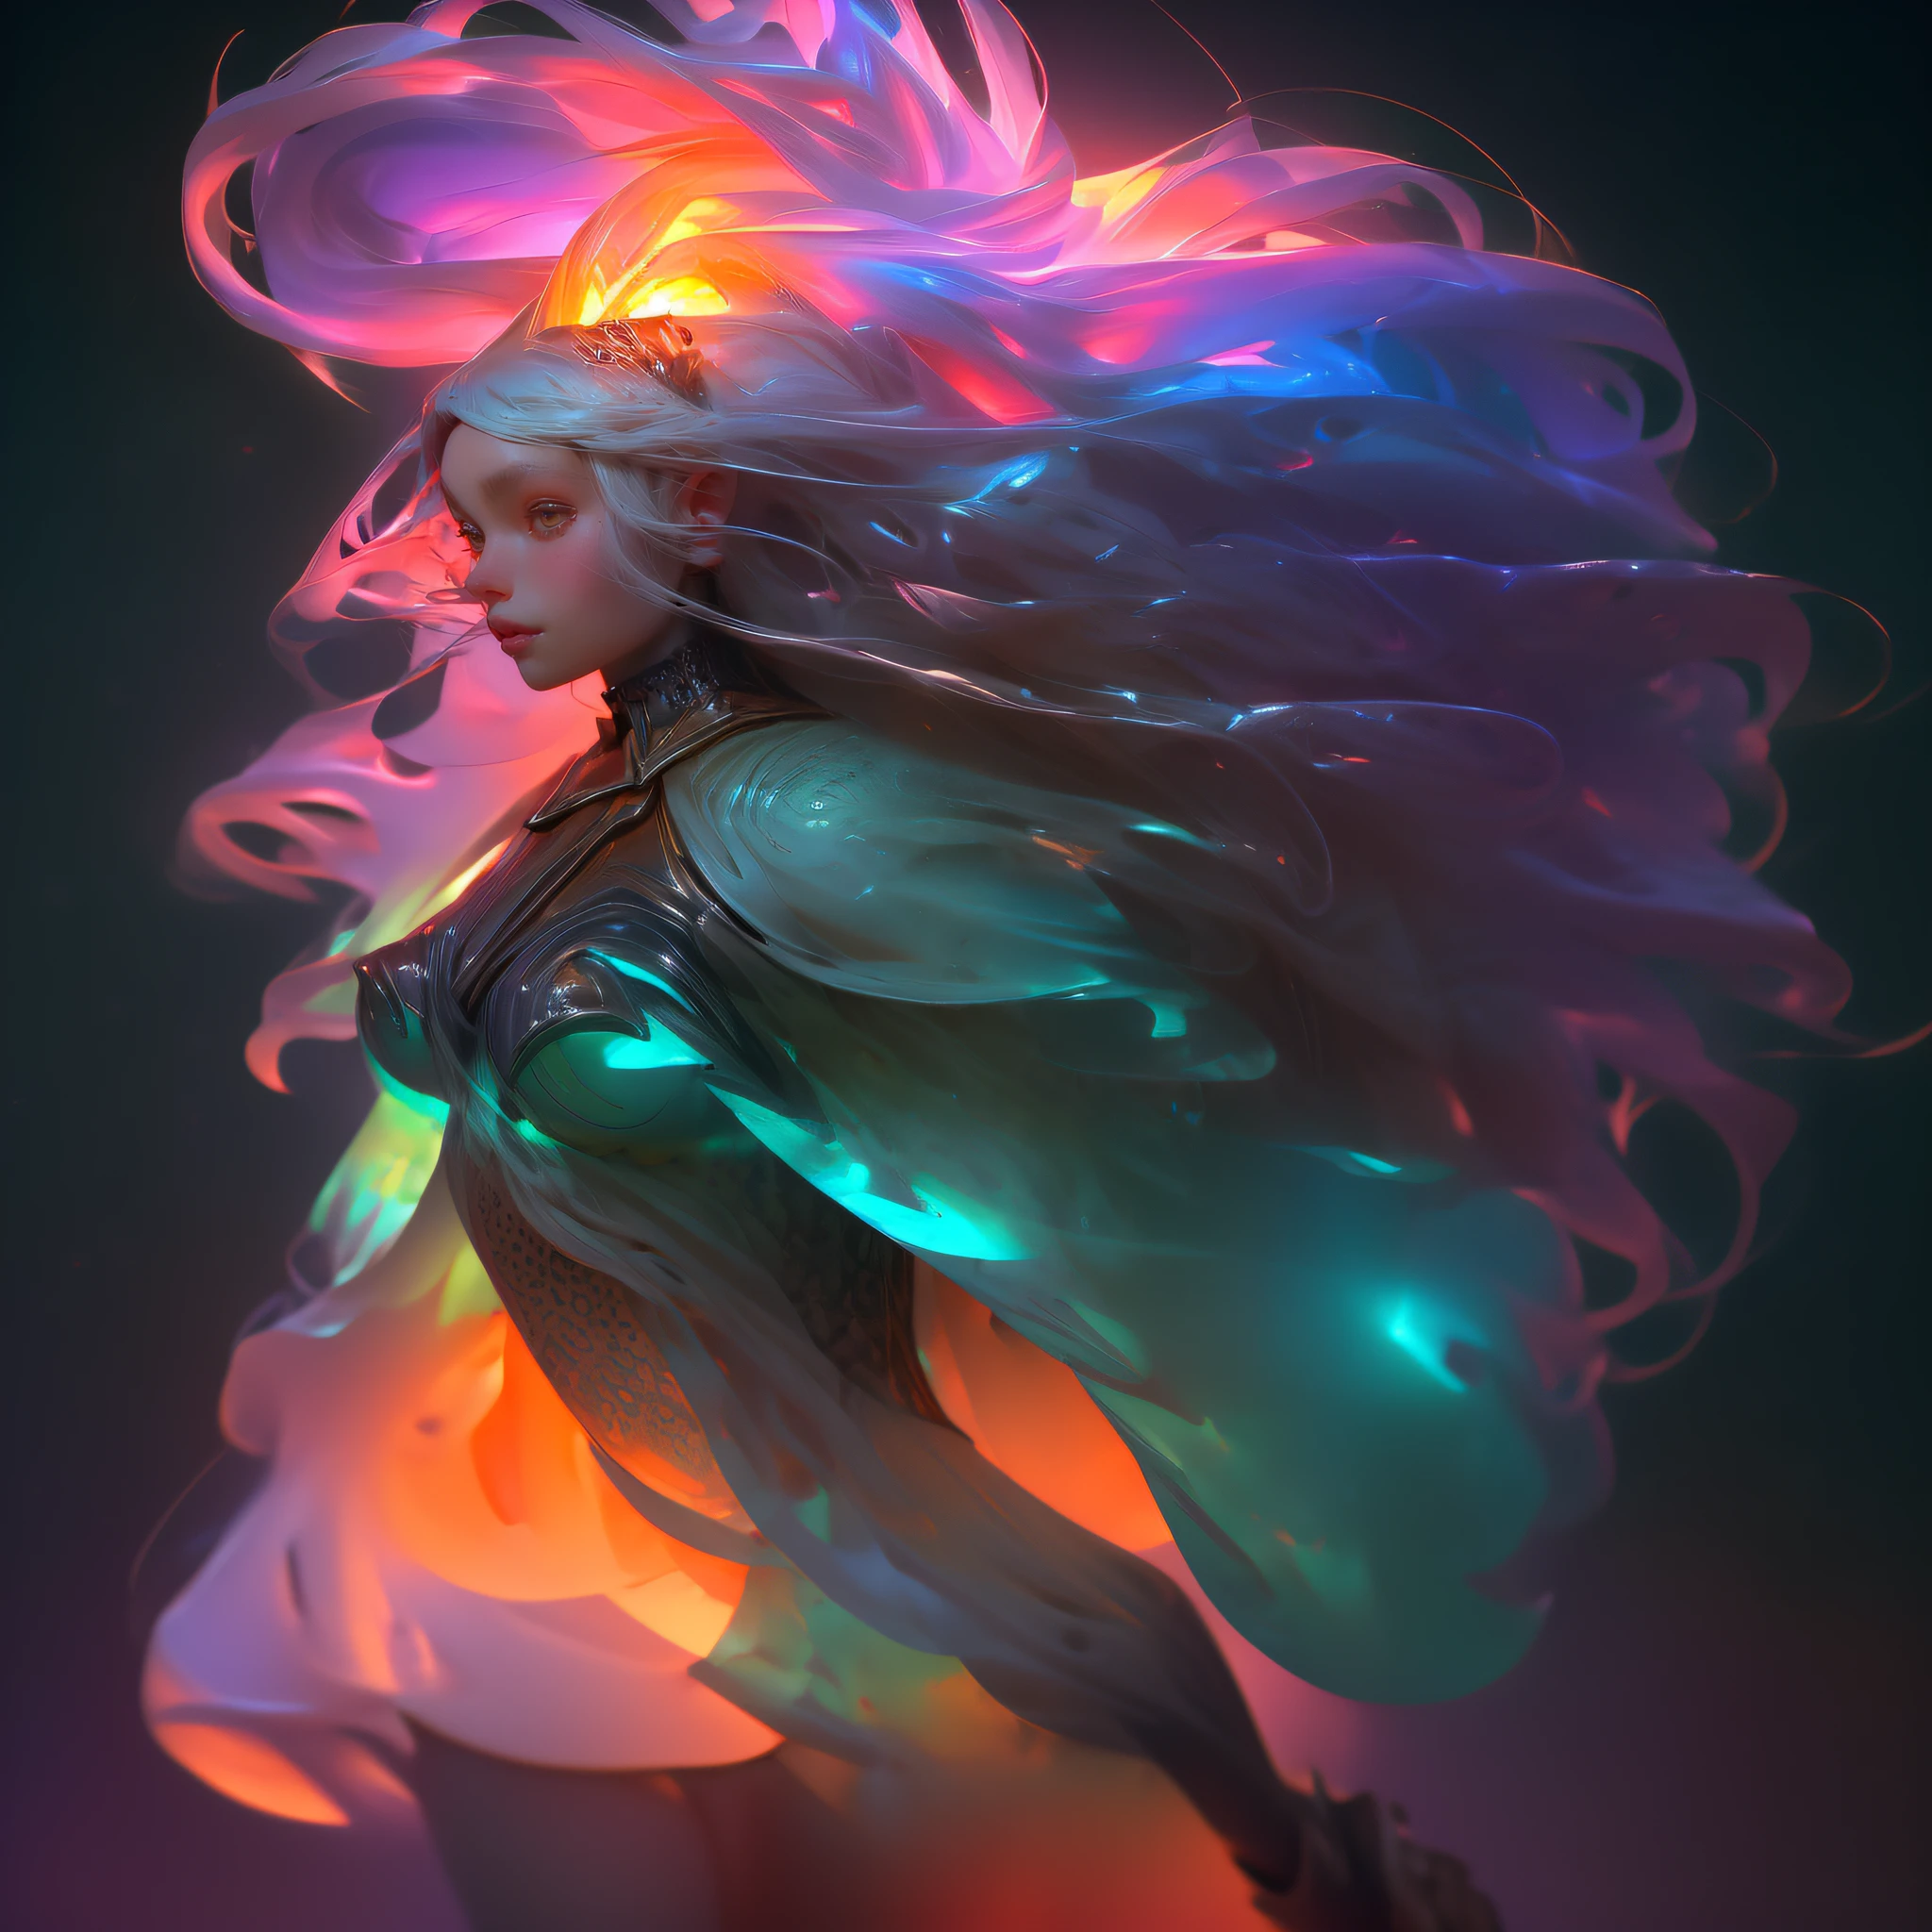 Elf Knight, (floating_long_hair:1.3), (detailed eyes:1.5), beauty face, cool vibe, fashionista pose, glowing glyphs, graphite, gold, unique, reflection, detailed texture, detailed pattern, (glowing aura:1.2), fantasy, fantastic, sharp, rainbow crystals, storm aura, floating:1.4, ((purple aura, green aura)), shine:1.3, (((looking viewer))), perfect anatomy, (chuppy body:1.4), (big_boobs:1.3), (big_ass:1.4), ((revealing clothes)), nijistyle, green_glowing, full_body, Golden+Purle clothes, stylish, (masterpiece:1.2), (best quality), 4k, ultra-detailed, (dynamic composition: 1.4), dark theme, (luminous lighting, atmospheric lighting), Final Fantasy style, magical, ((glove full hands)), viera, helmet, revealing clothes, vambraces, armored legwears, high heels, foots armor